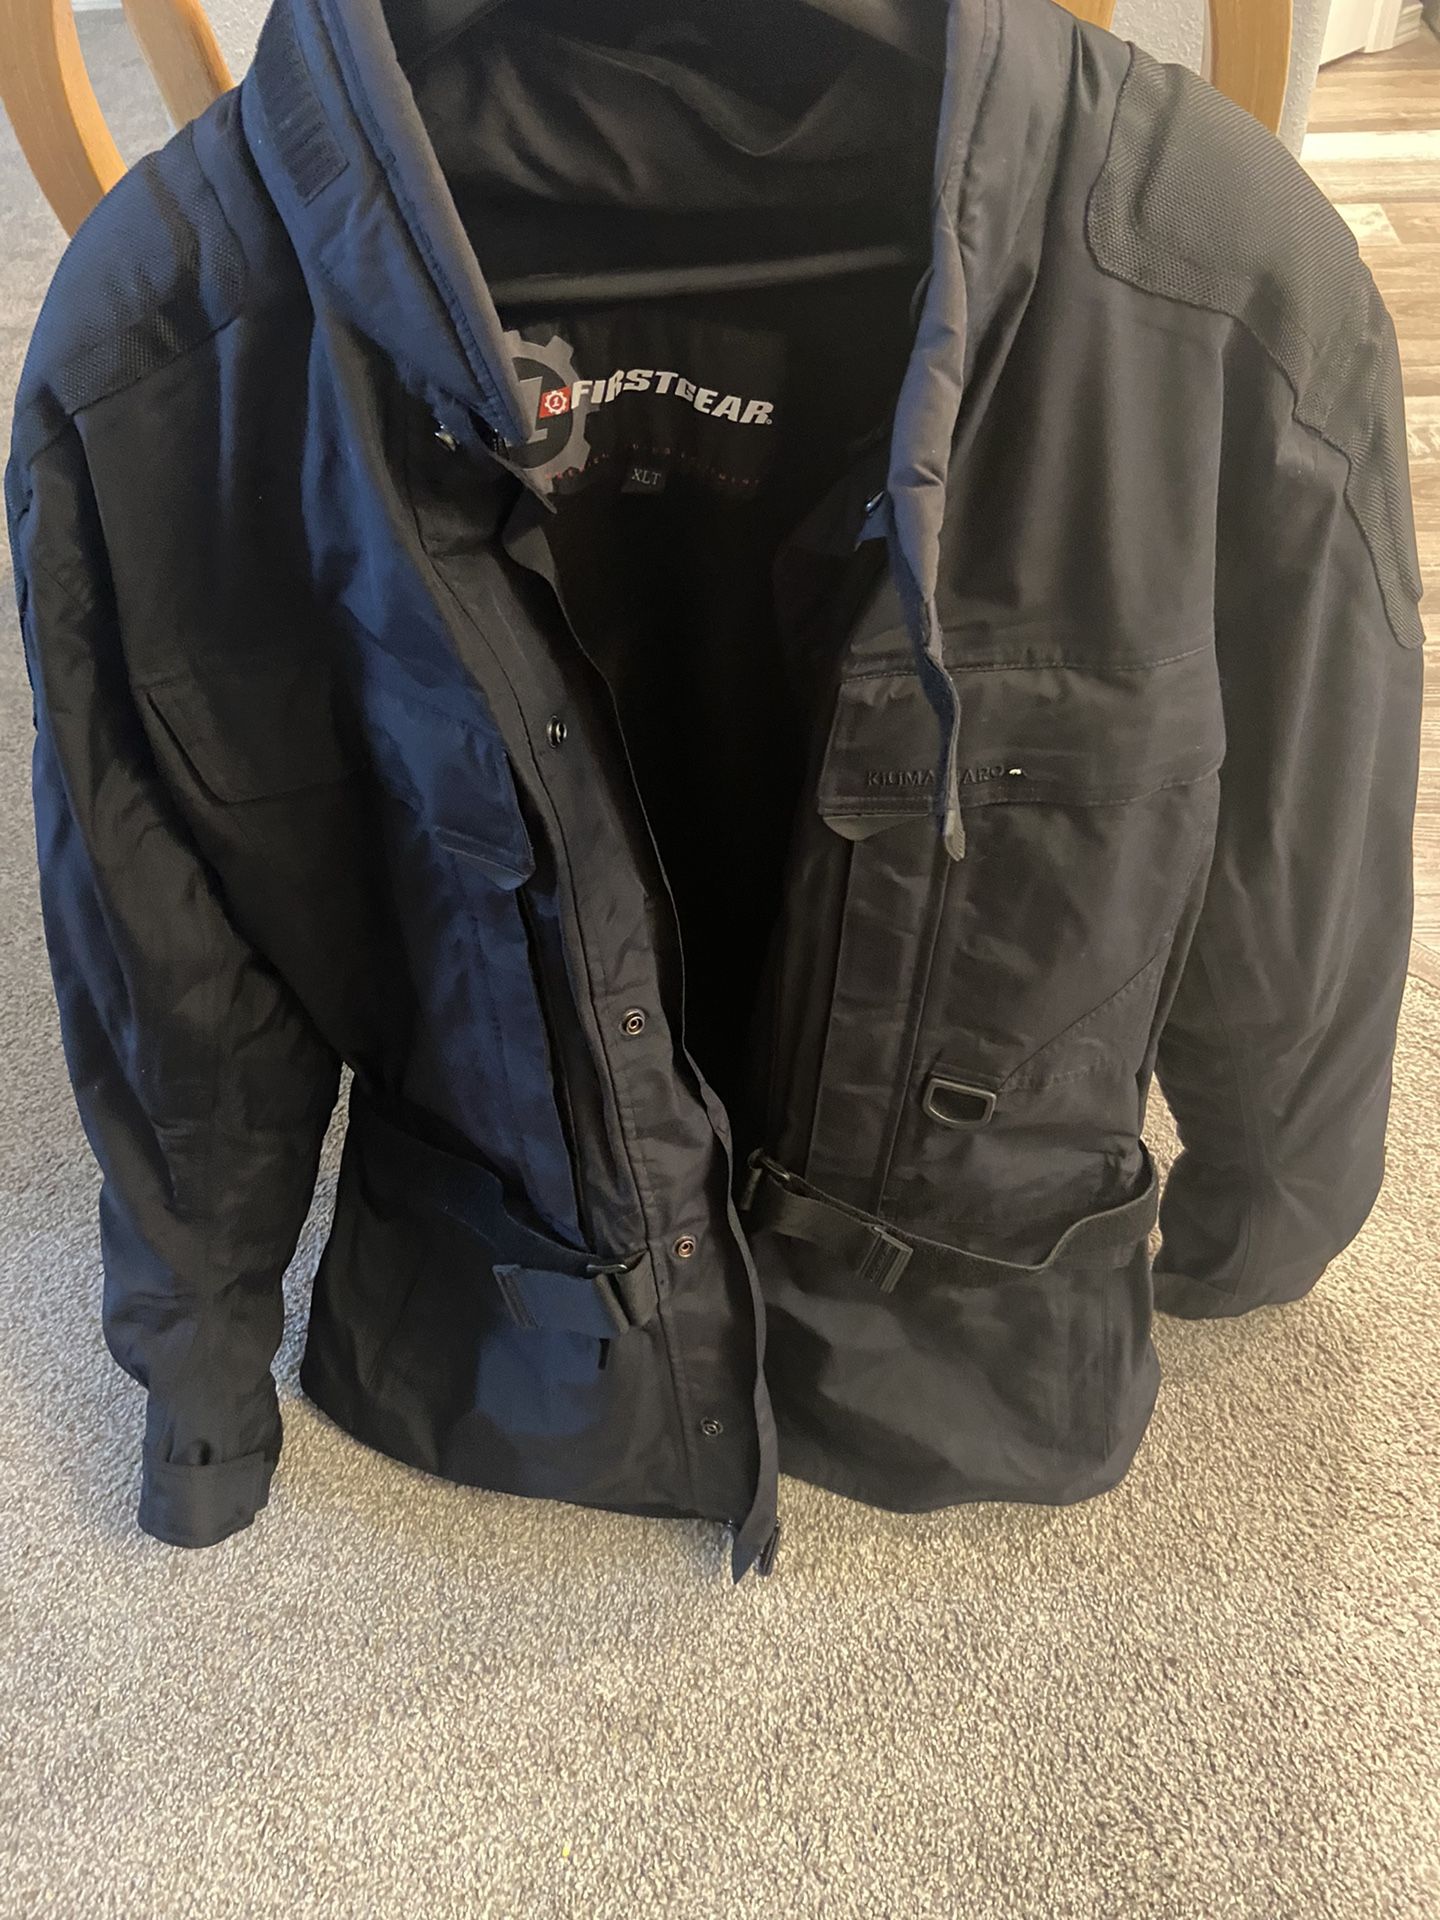 First Gear Motorcycle Jacket Xlt